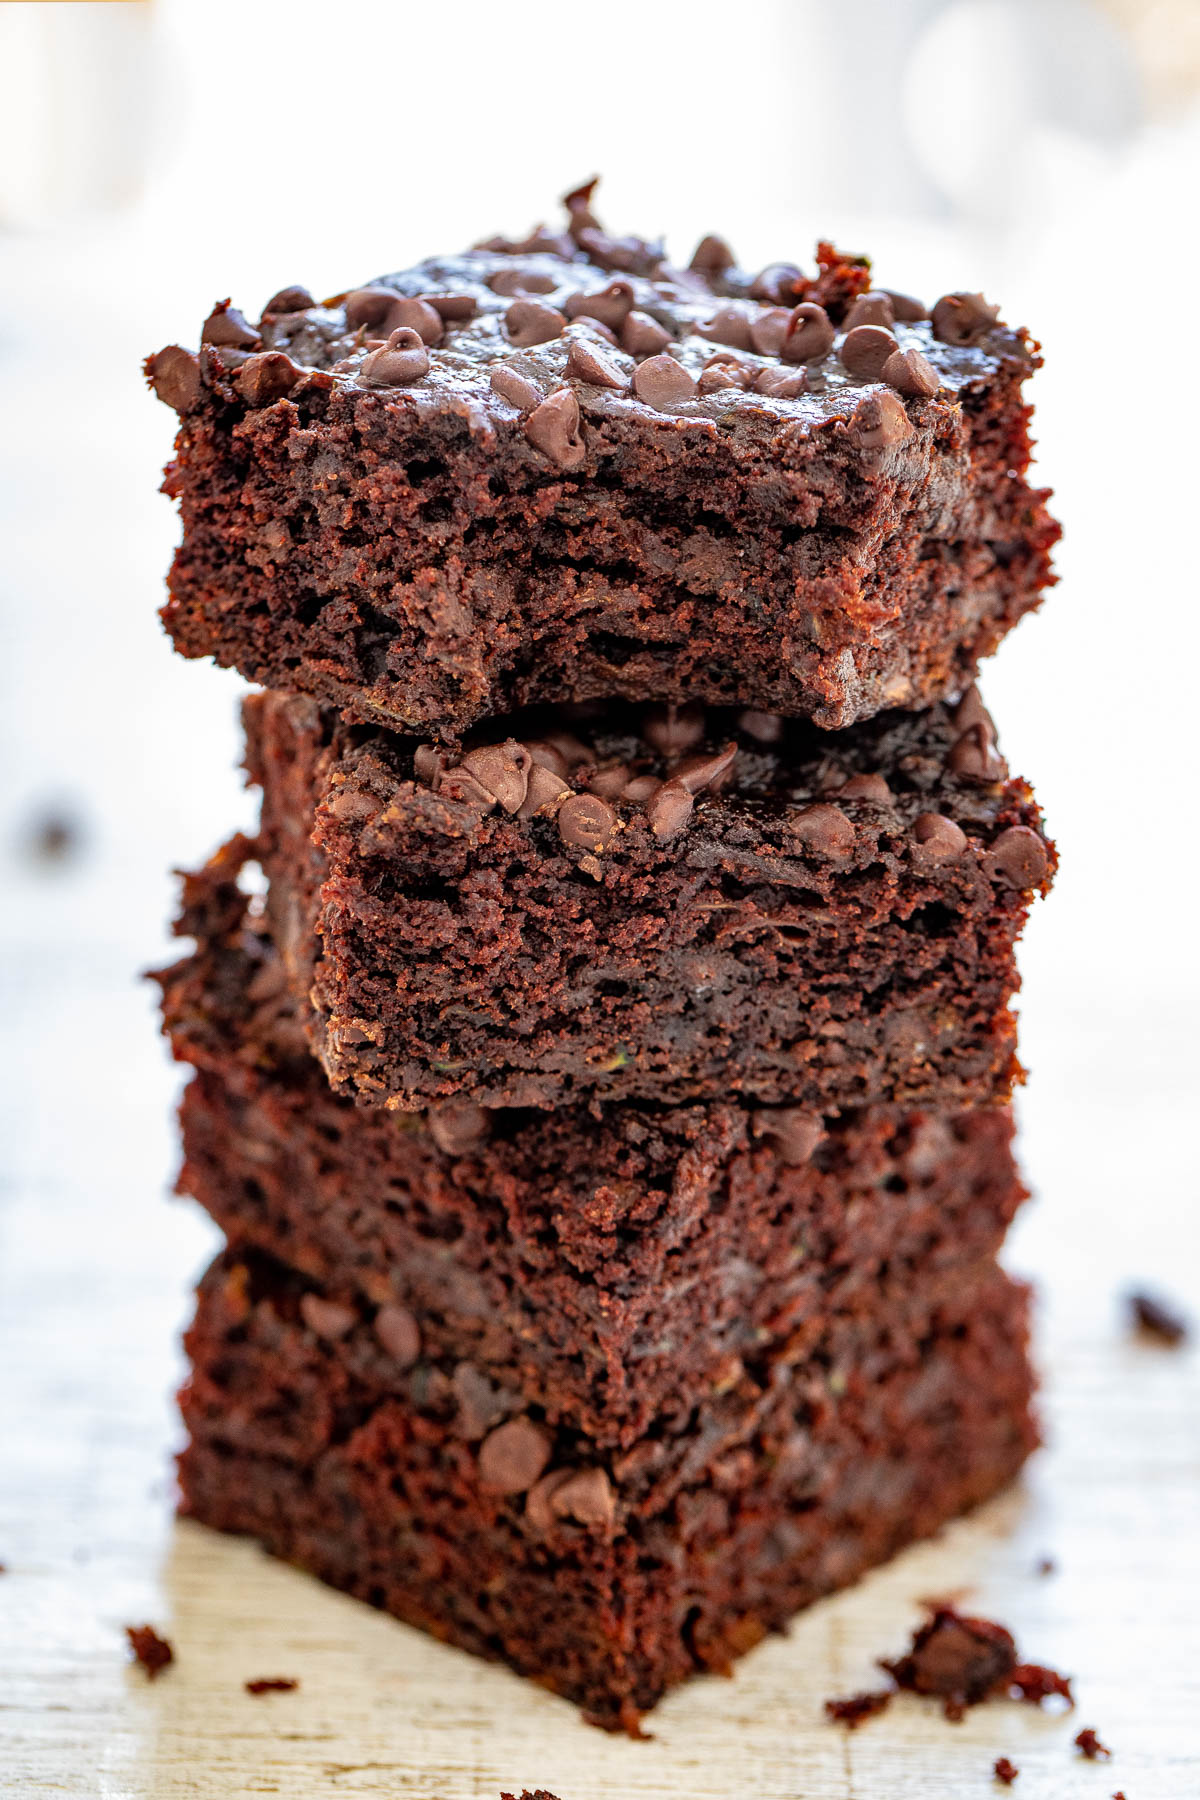 Zucchini Brownies - The BEST zucchini brownies that are EASY, made in one bowl, and no mixer required! Soft, fudgy, and almost taste like rich chocolate cake. They're filled and topped with mini chocolate chips to add even more fabulous chocolate flavor. And NO, you cannot taste the zucchini at all - promise! 